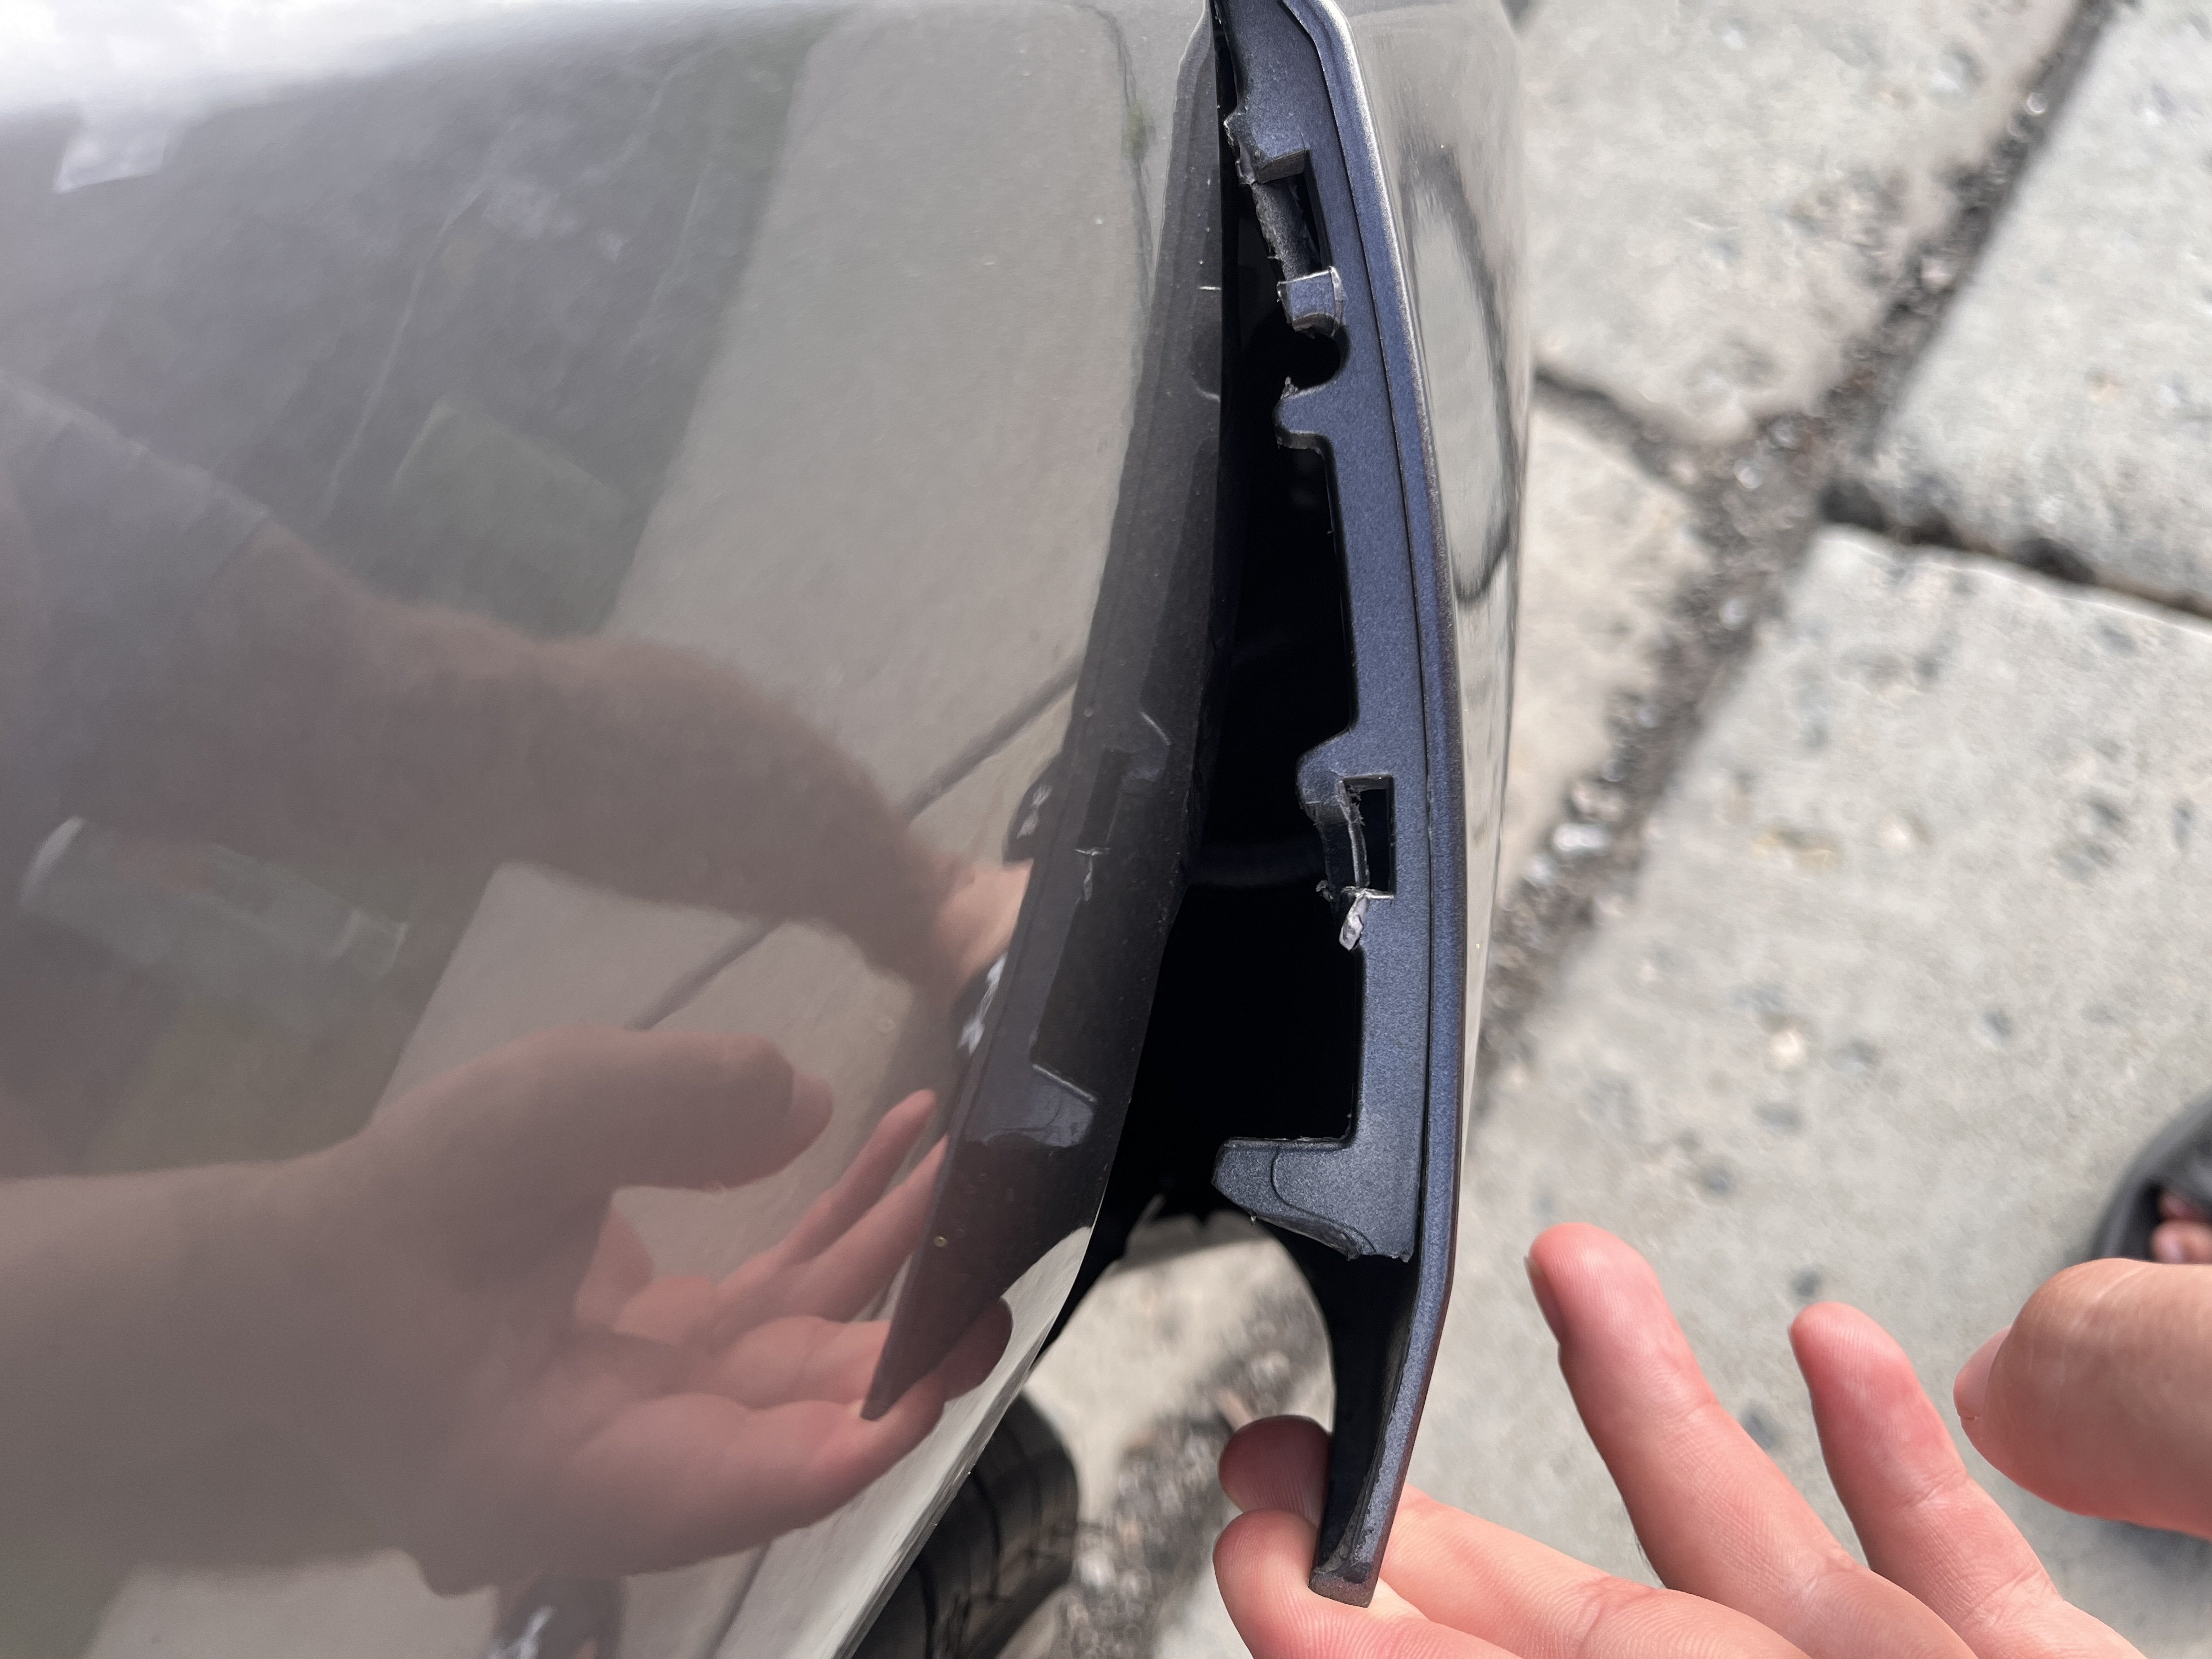 Options for defective bumper clips?